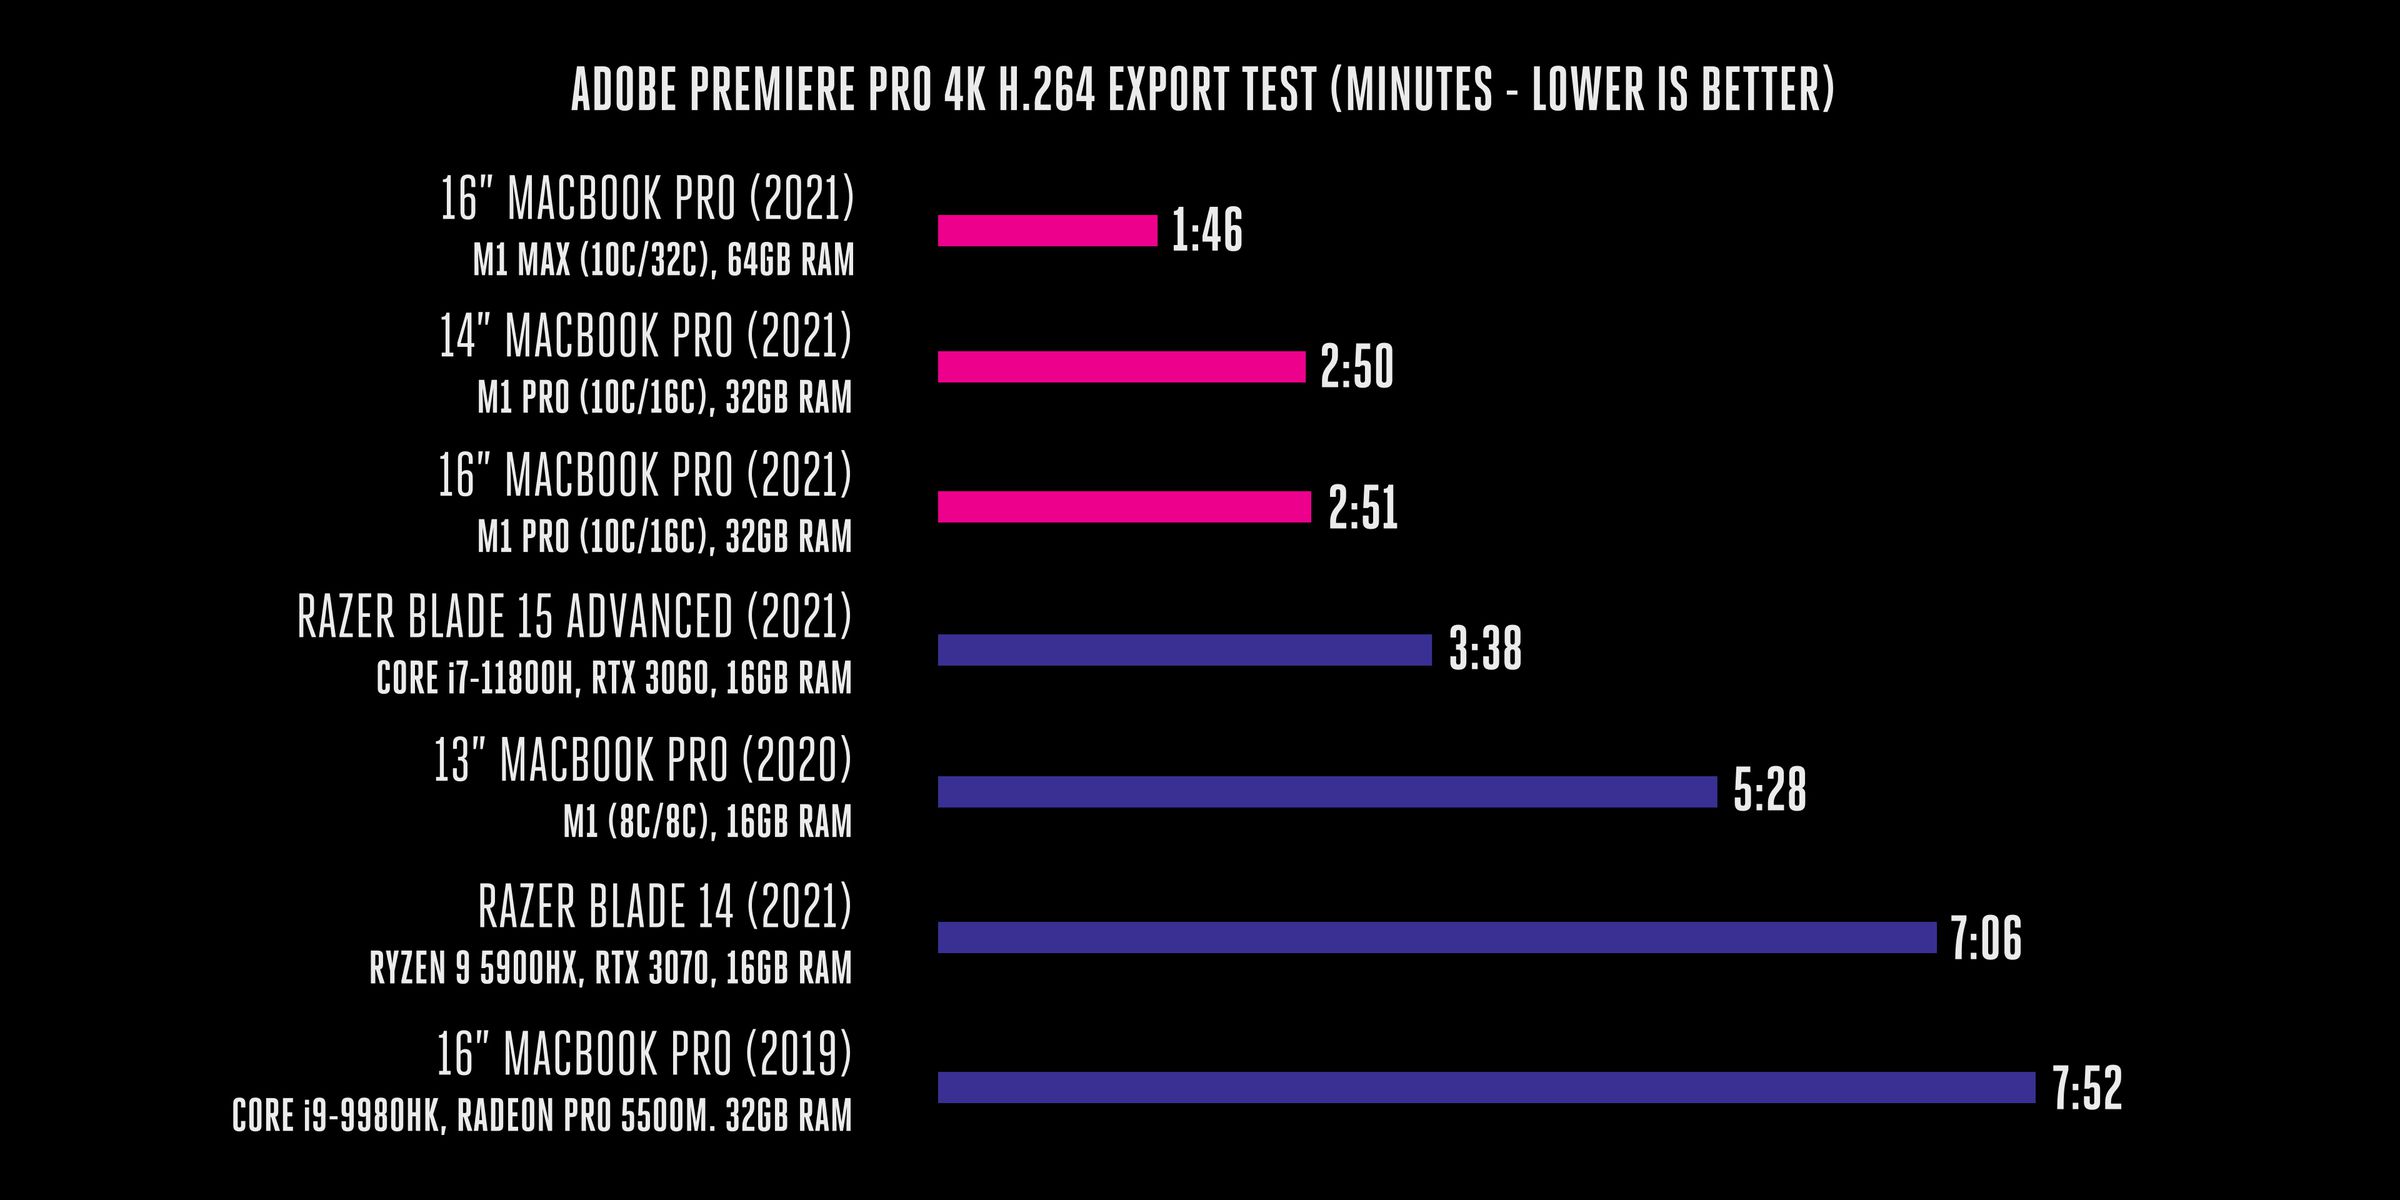 A bar graph showing a 1 minute 46 second time to export a 5 minute 33 second 4K video from Premiere Pro on the 16-inch MacBook Pro M1 Max, 2 minutes 50 seconds for the 14-inch MacBook Pro M1 Pro, 2 minutes 51 seconds for the 16-inch MacBook Pro M1 Pro, 3 minutes 38 seconds for the Razer Blade 15 Advanced 2021, 5 minutes 28 seconds for the 13-inch MacBook Pro M1, 7 minutes 6 seconds for the Razer Blade 14 2021, and 7 minutes 52 seconds for the 16-inch MacBook Pro 2019.